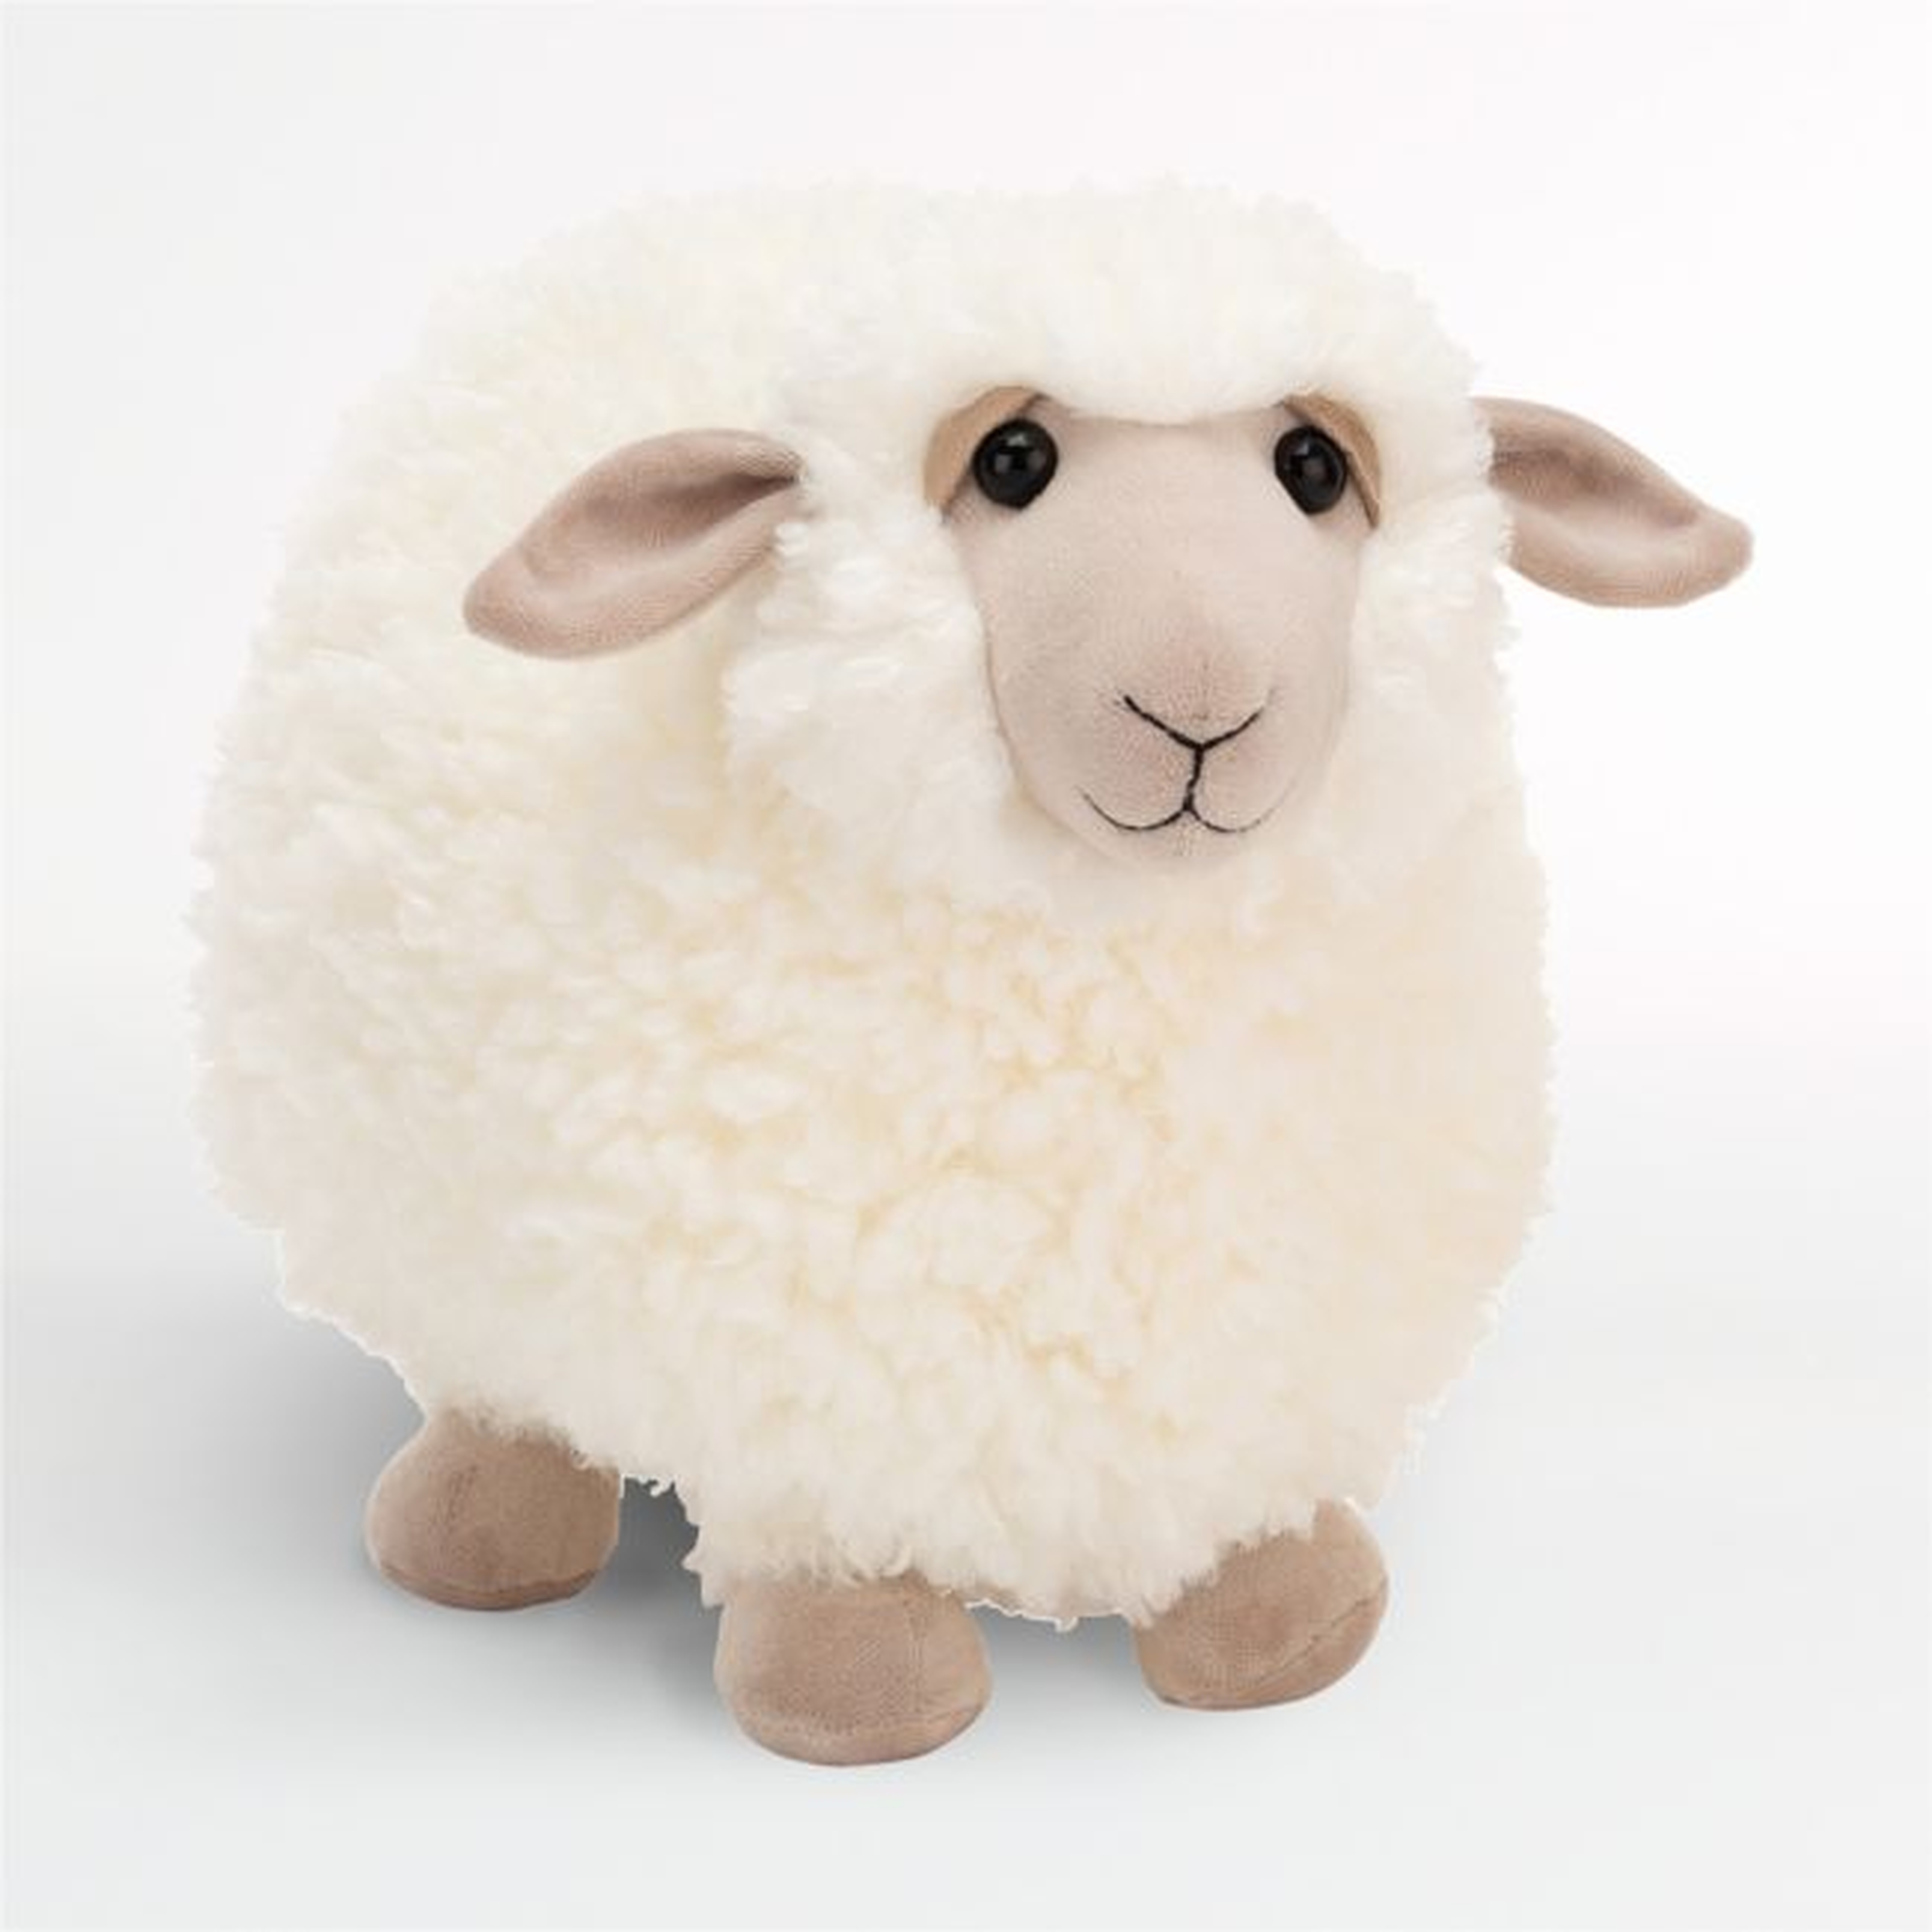 Jellycat ® Rolbie Sheep - Crate and Barrel